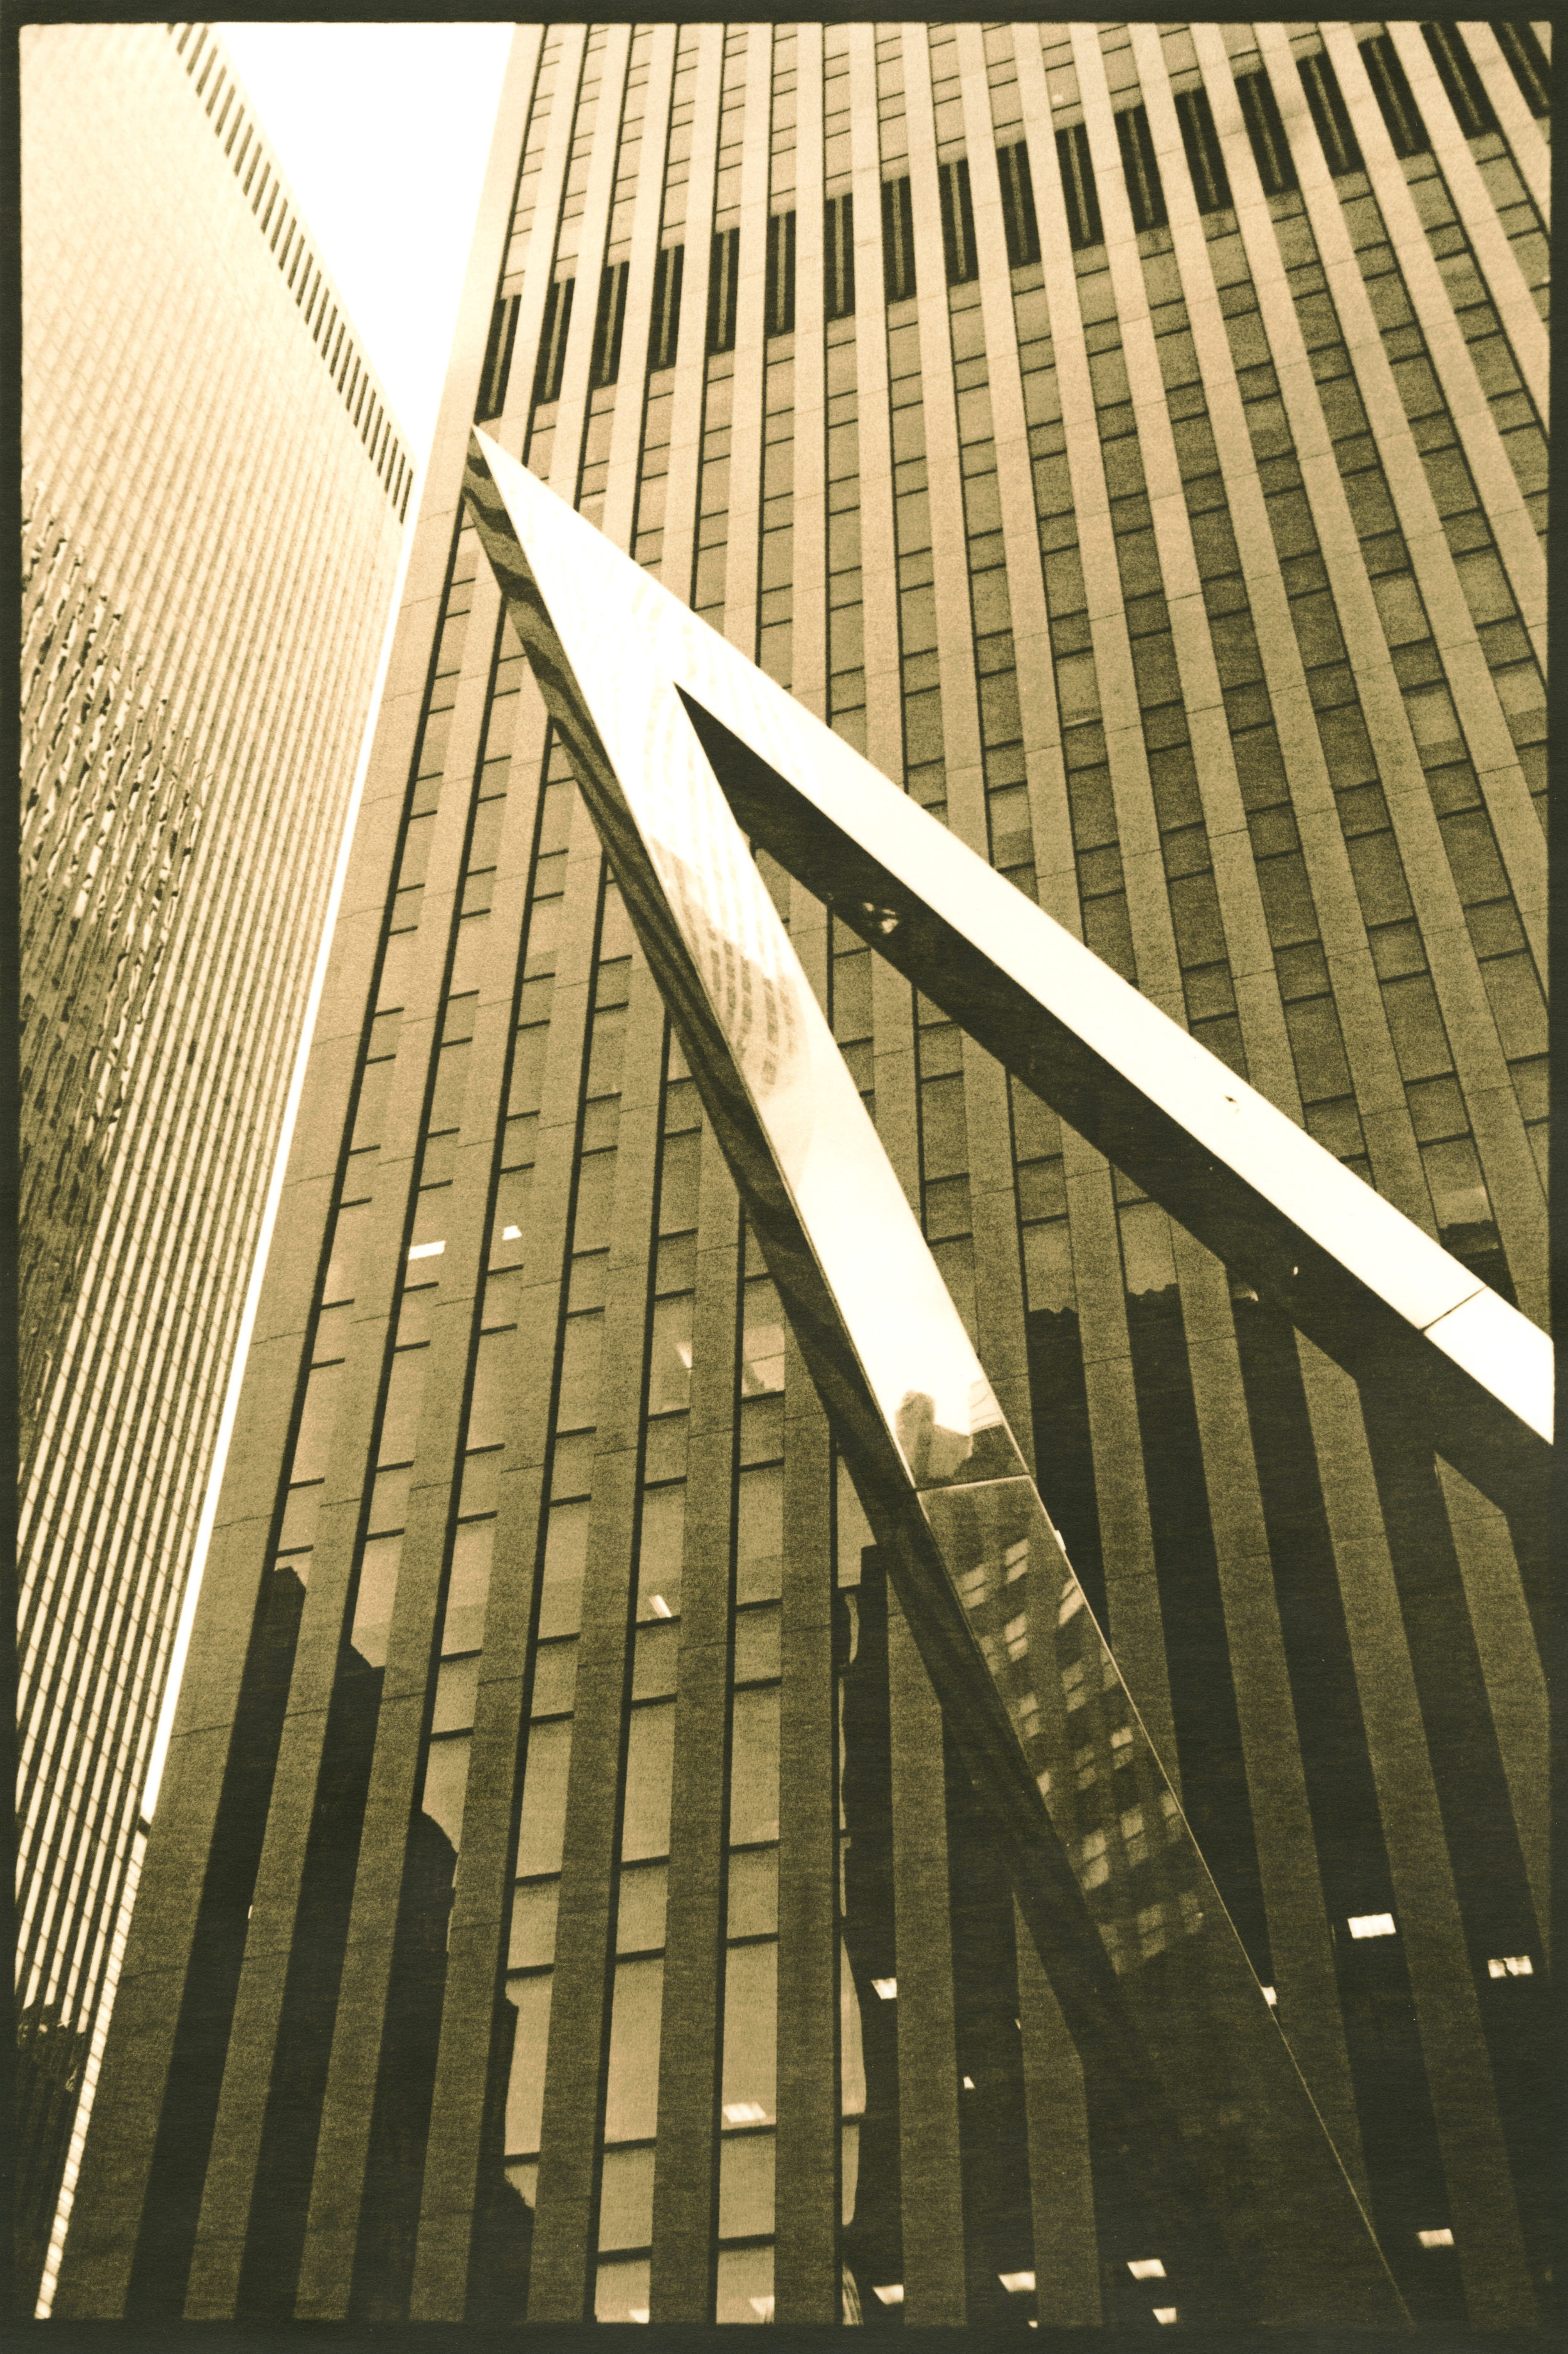 Fifth Ave, NYC, 2005